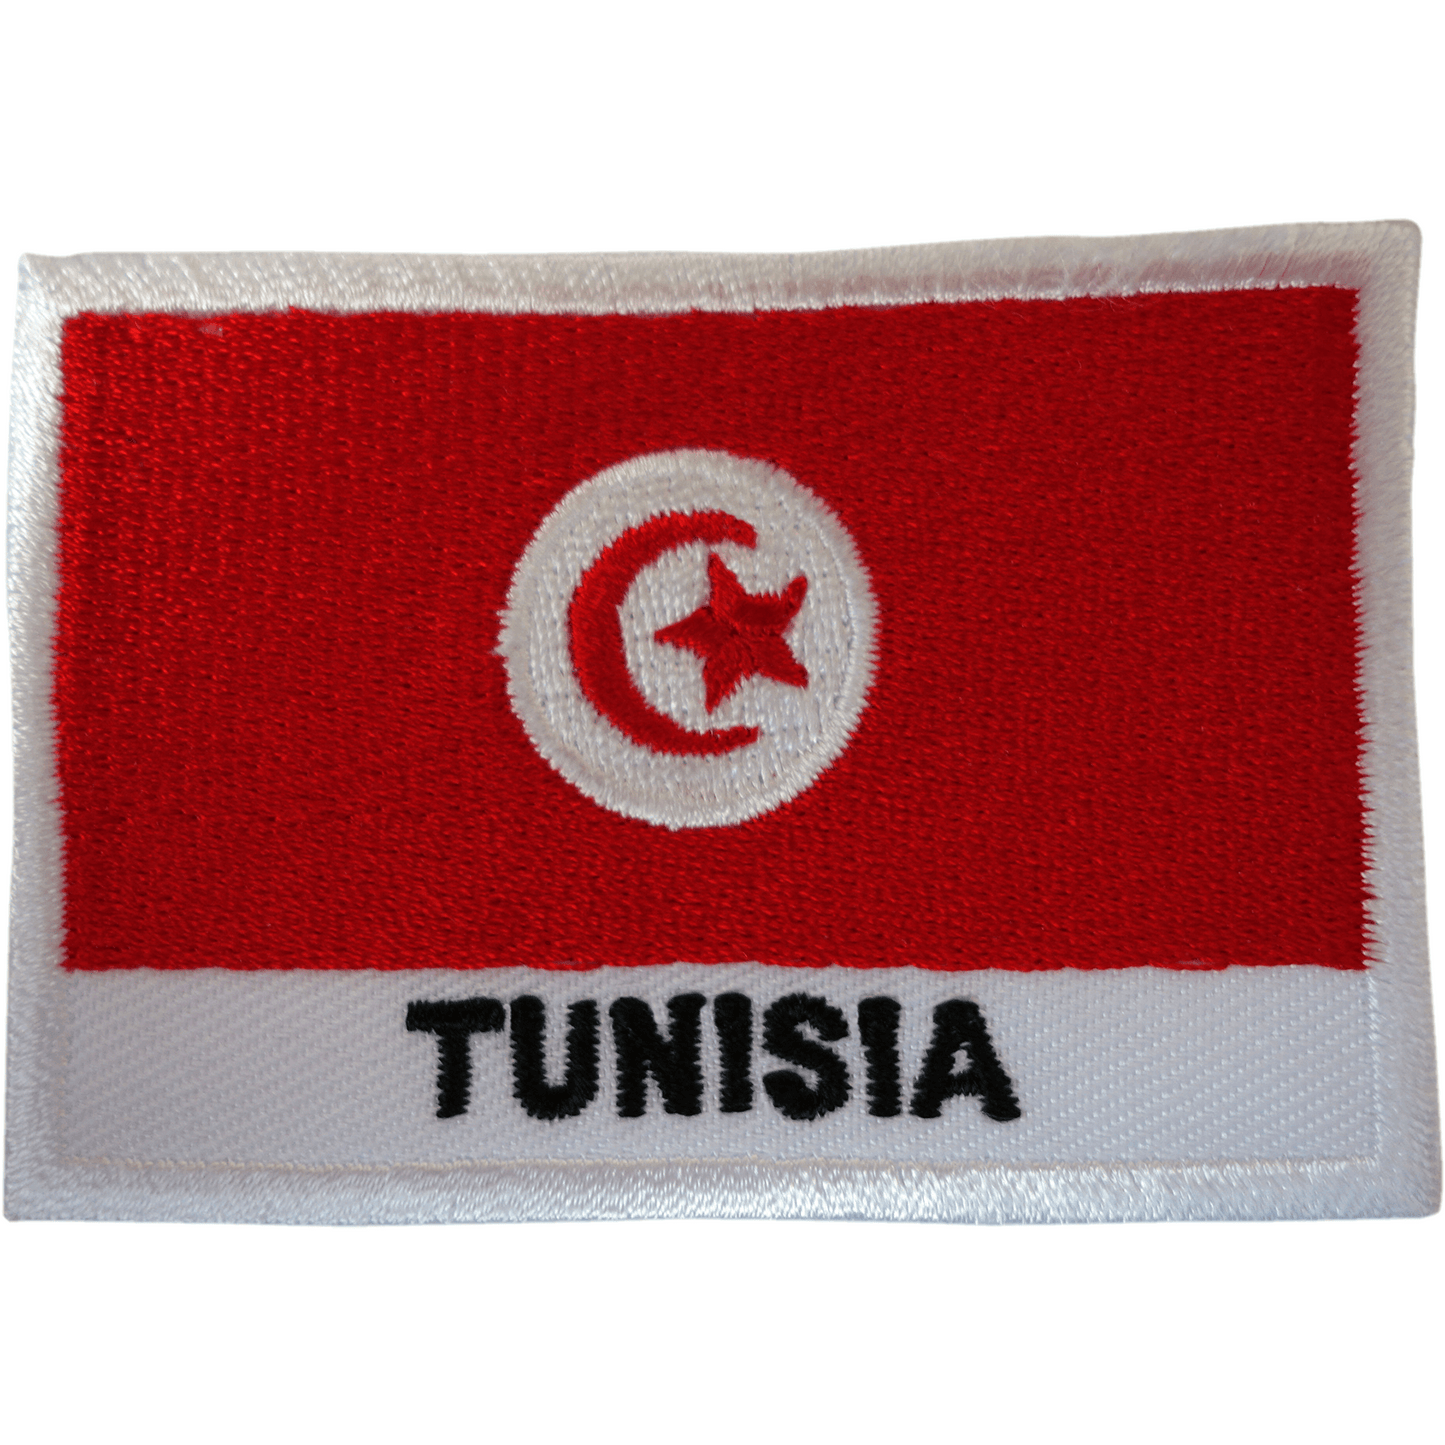 Tunisia Flag Patch Iron On Sew On Clothes Bag Tunisian Africa Embroidered Badge